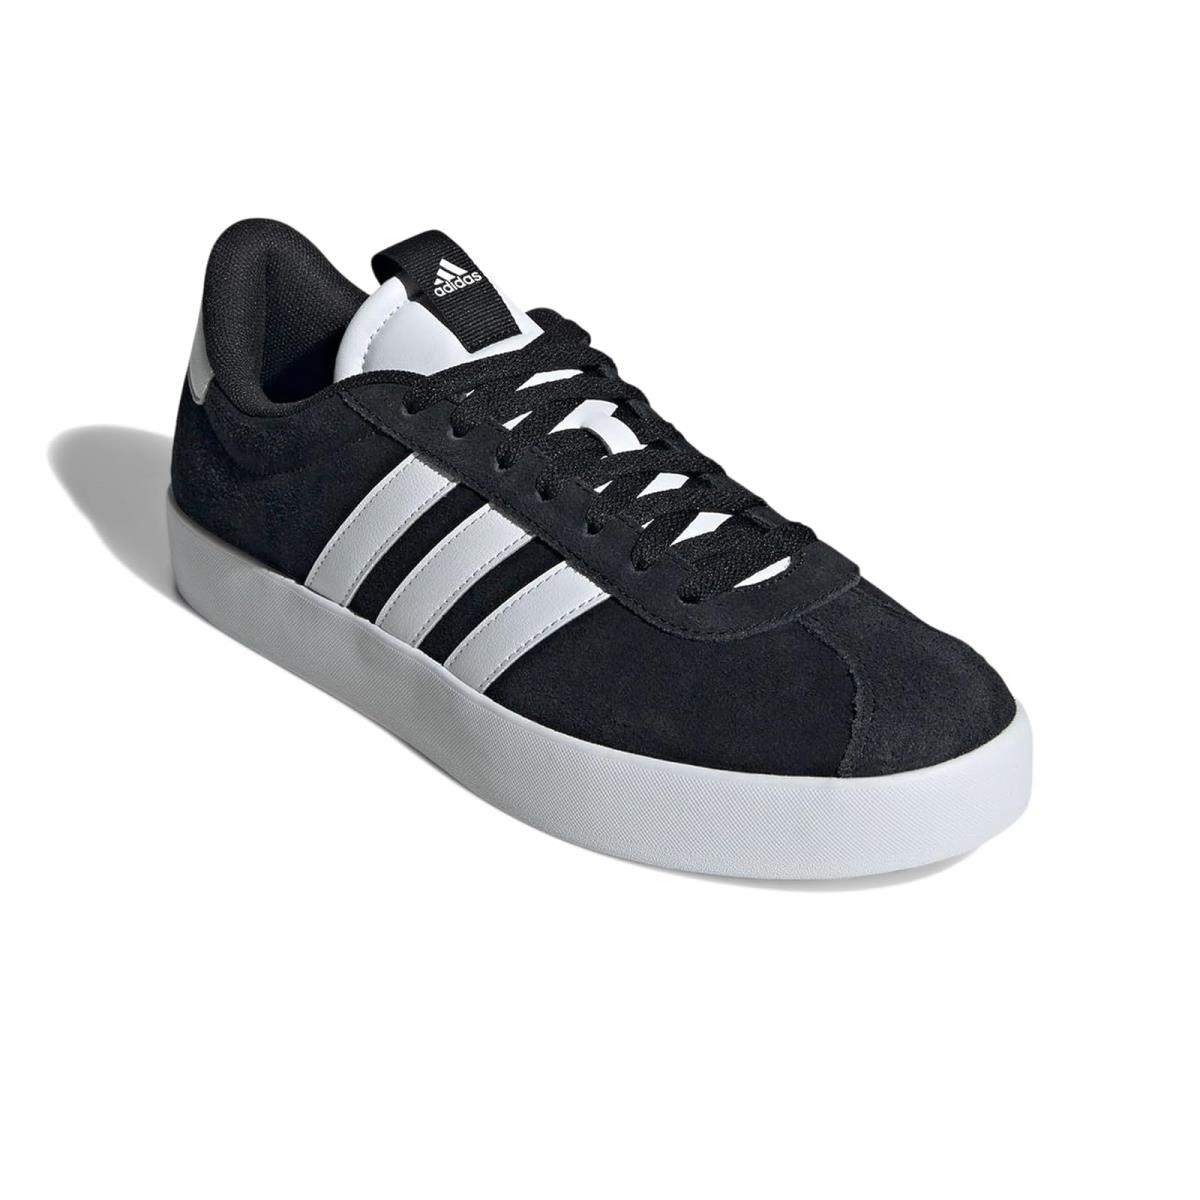 Man`s Sneakers Athletic Shoes Adidas VL Court 3.0 Black/White/Black